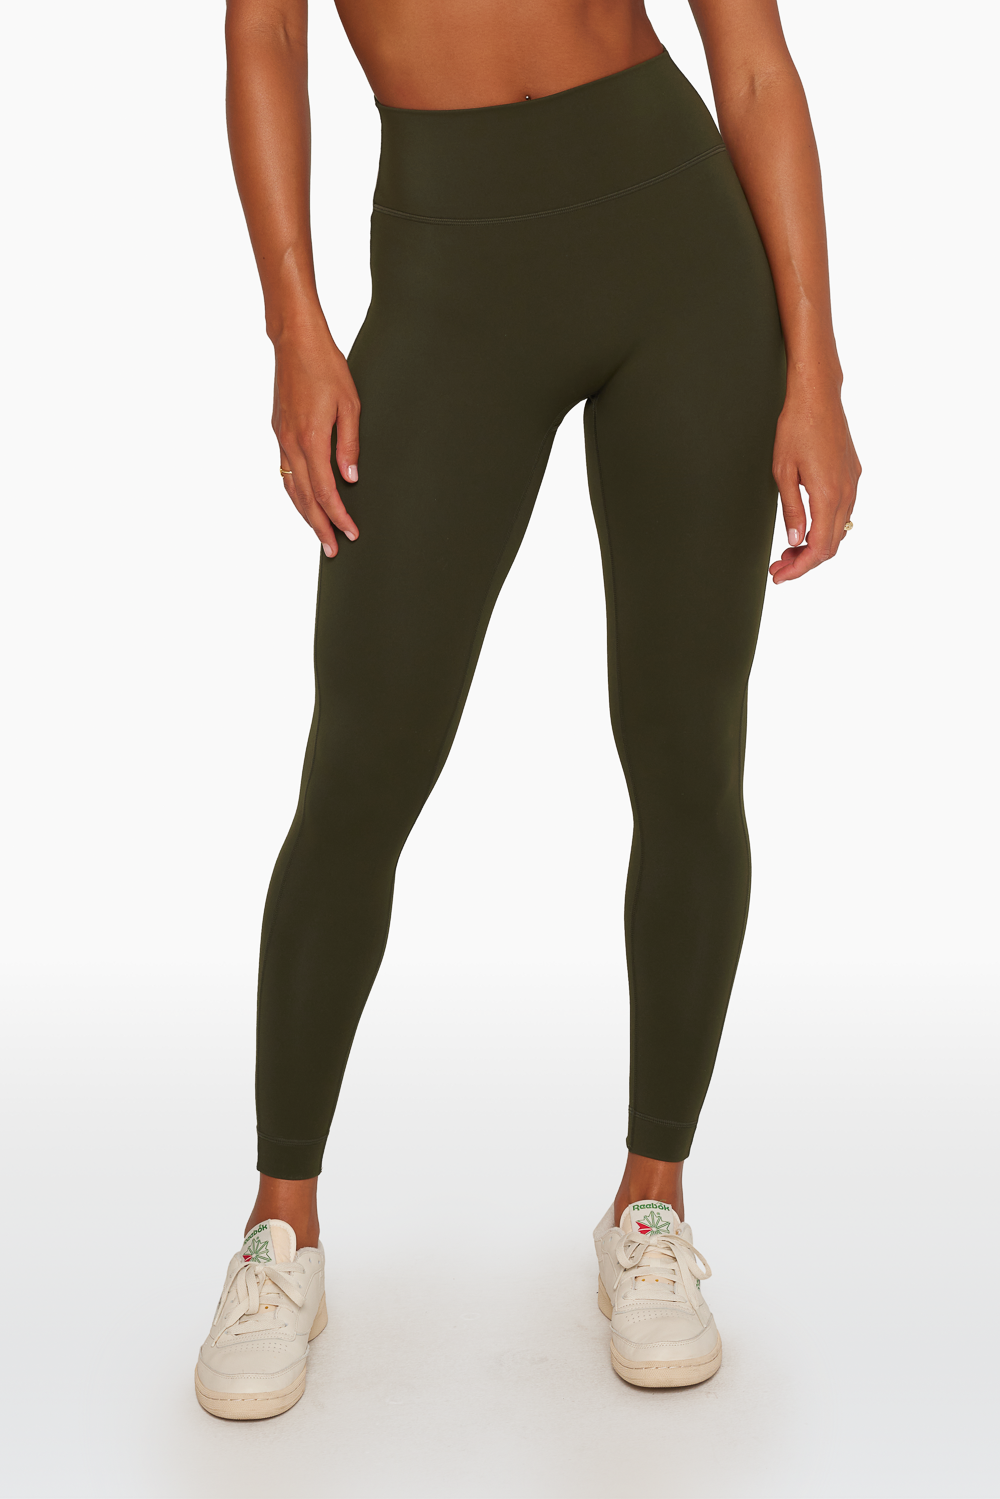 SET™ SPORTBODY® LEGGINGS IN AFTER HOURS